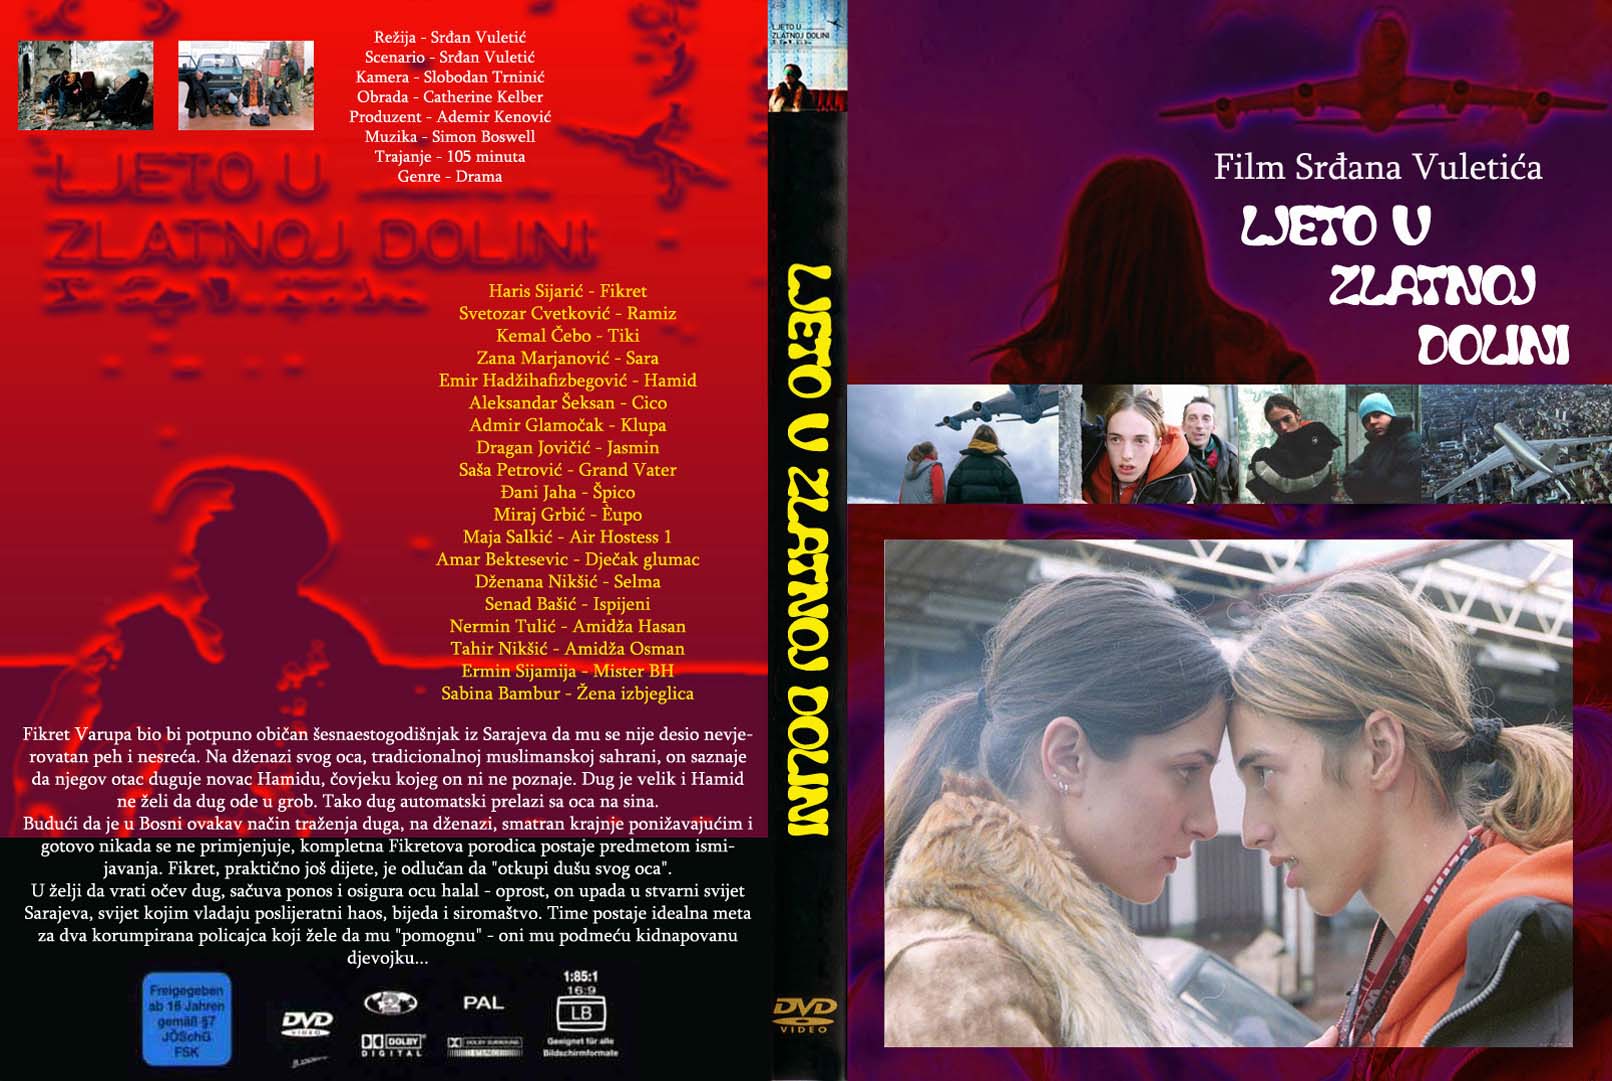 Click to view full size image -  DVD Cover - L - ljeto_u_zlatnoj_dolini_dvd - ljeto_u_zlatnoj_dolini_dvd.jpg